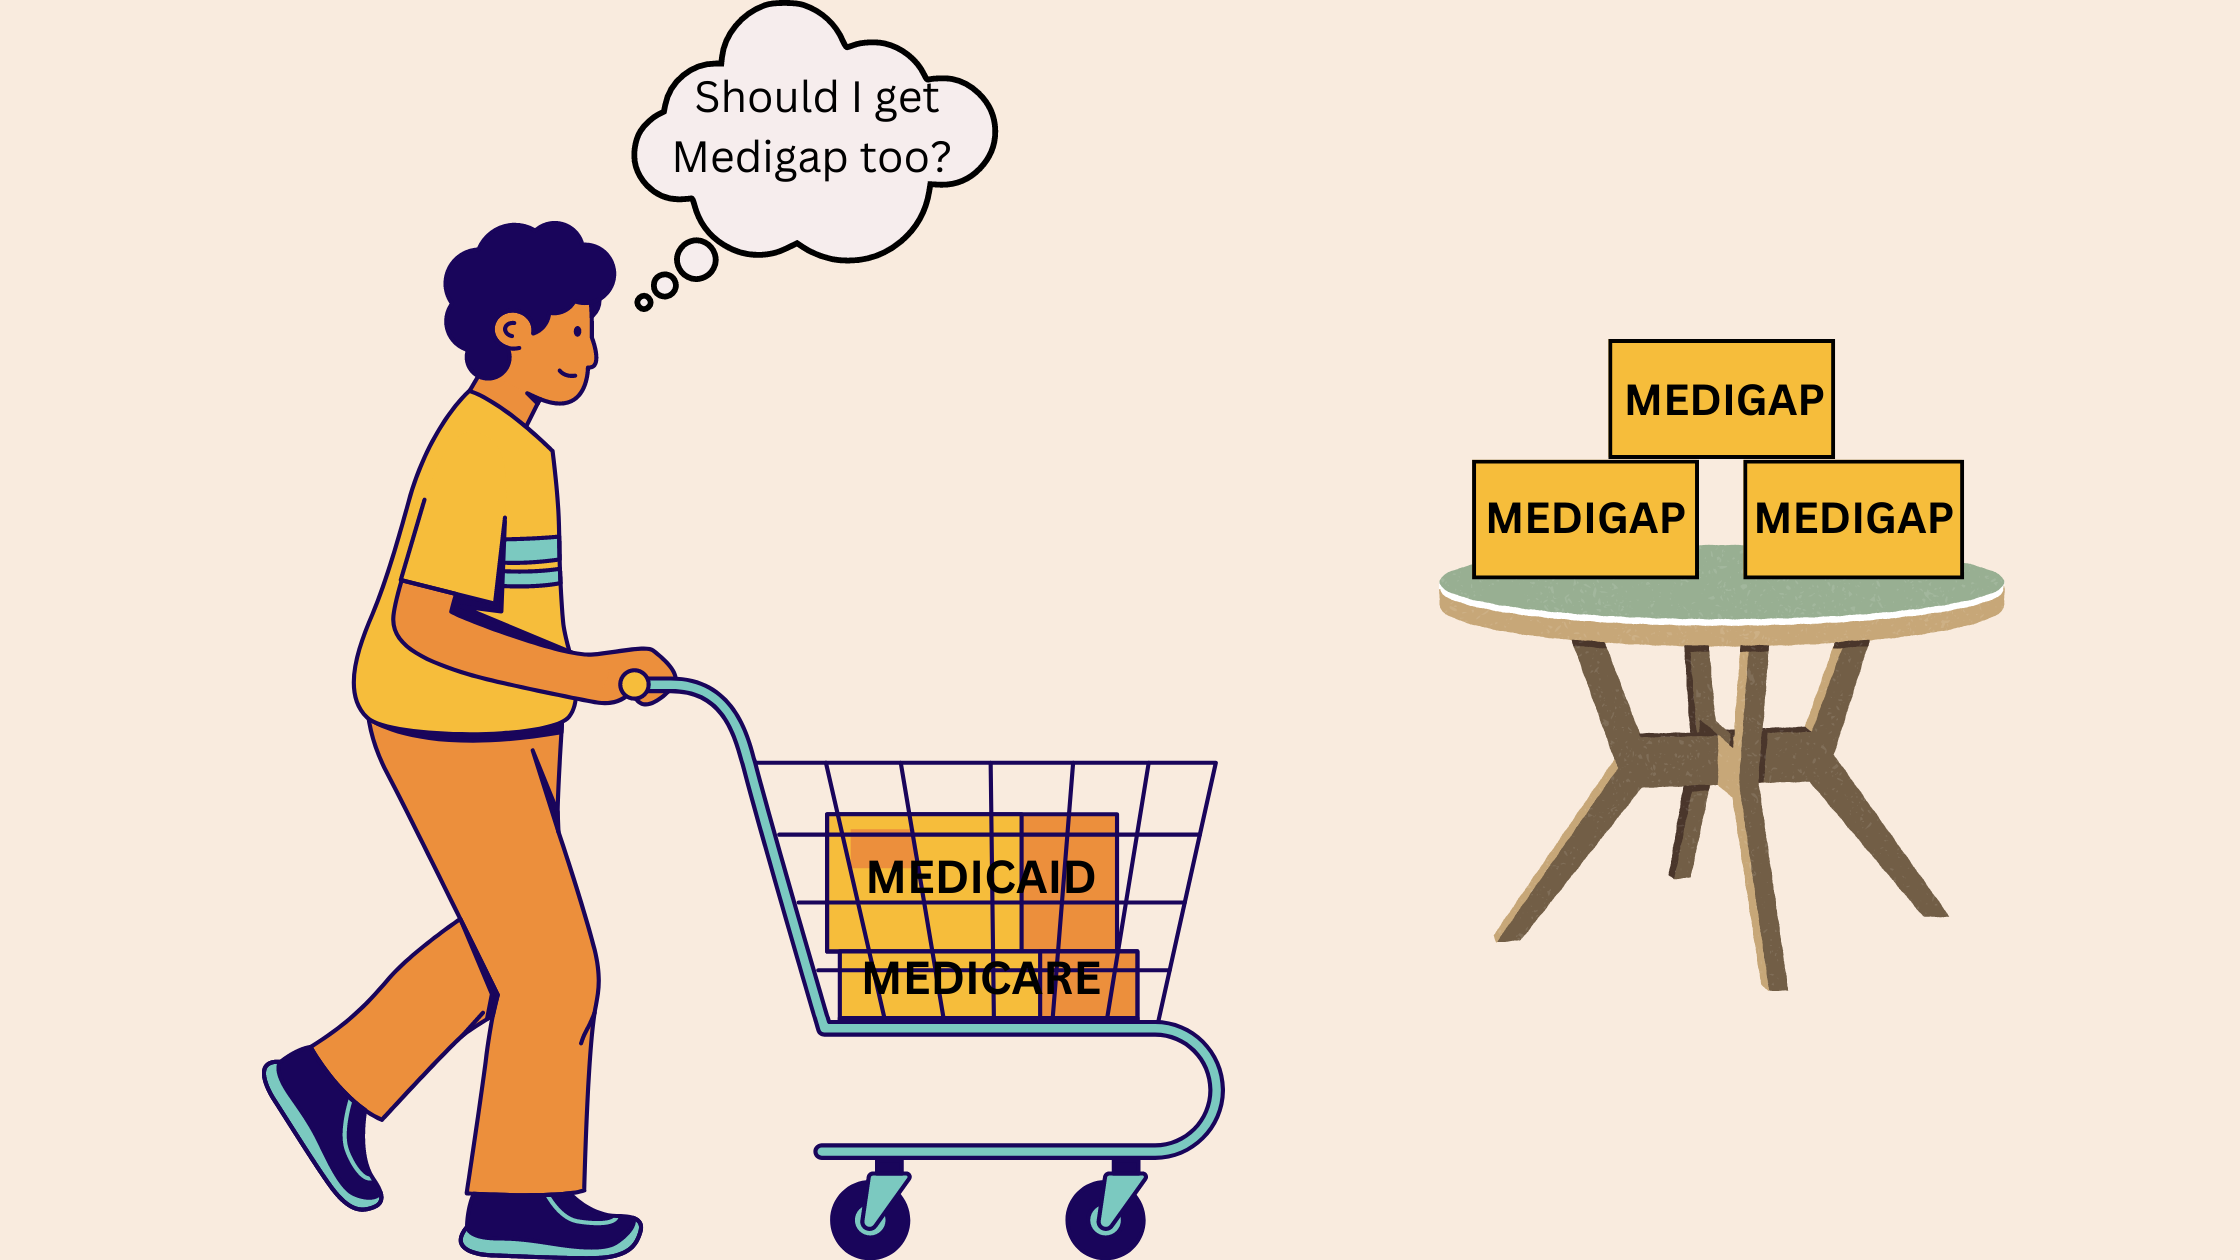 A person with a shopping cart already containing medicaid and medicare sees Medigap options on a table. In a thought bubble, they ask "Should I get Medigap too?"